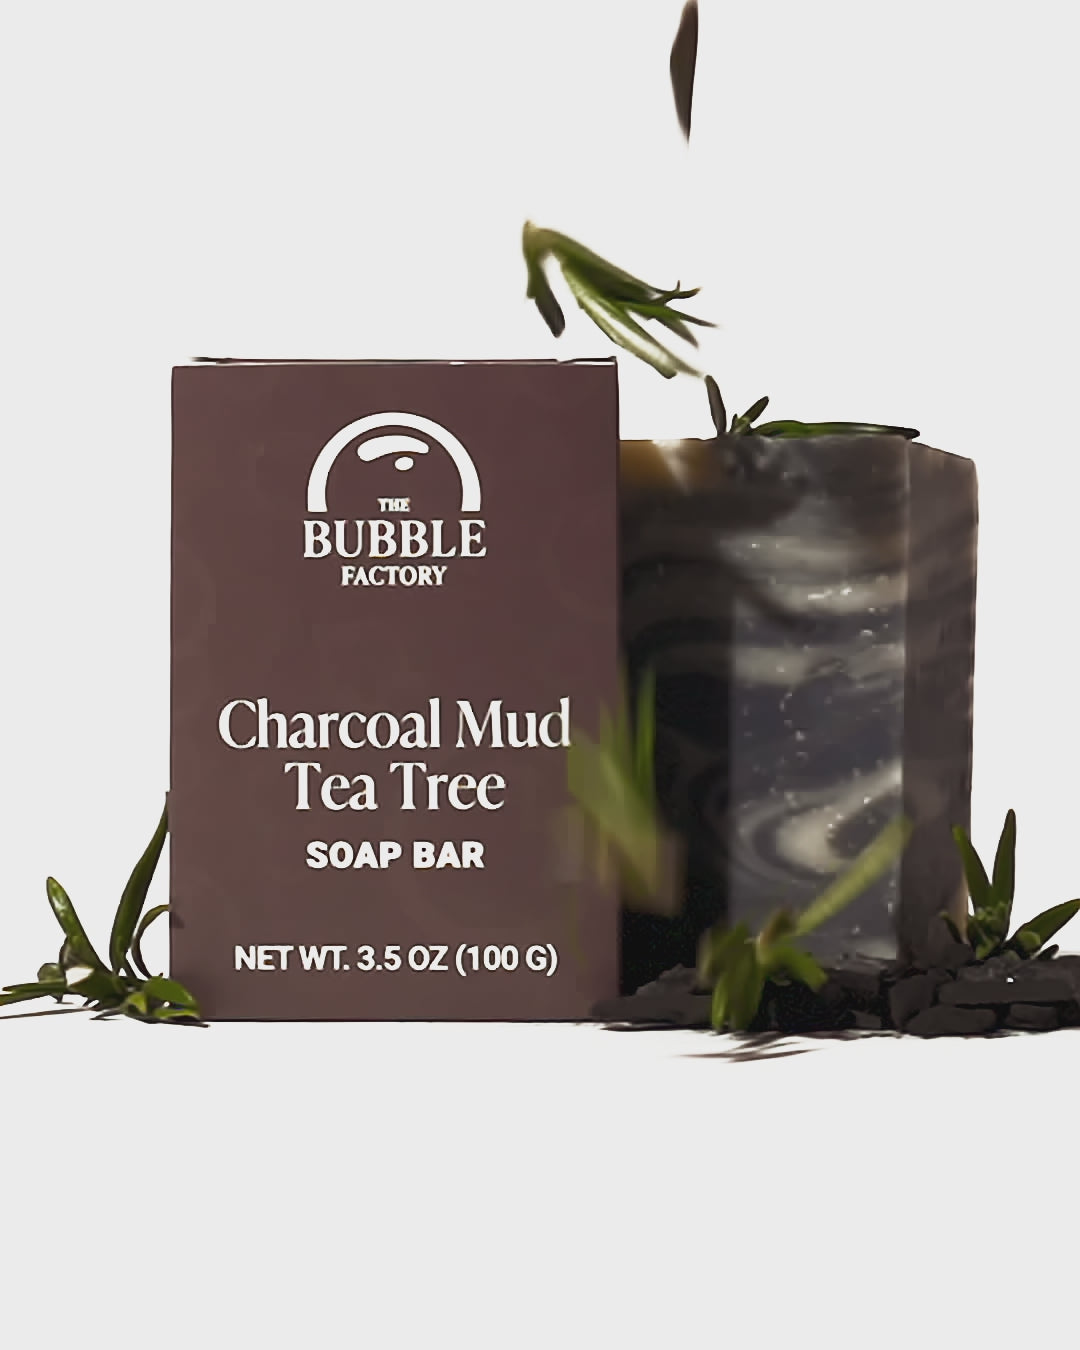 Charcoal Mud Tea Tree Soap Bar, Front view Animation with Leaves and Charcoal